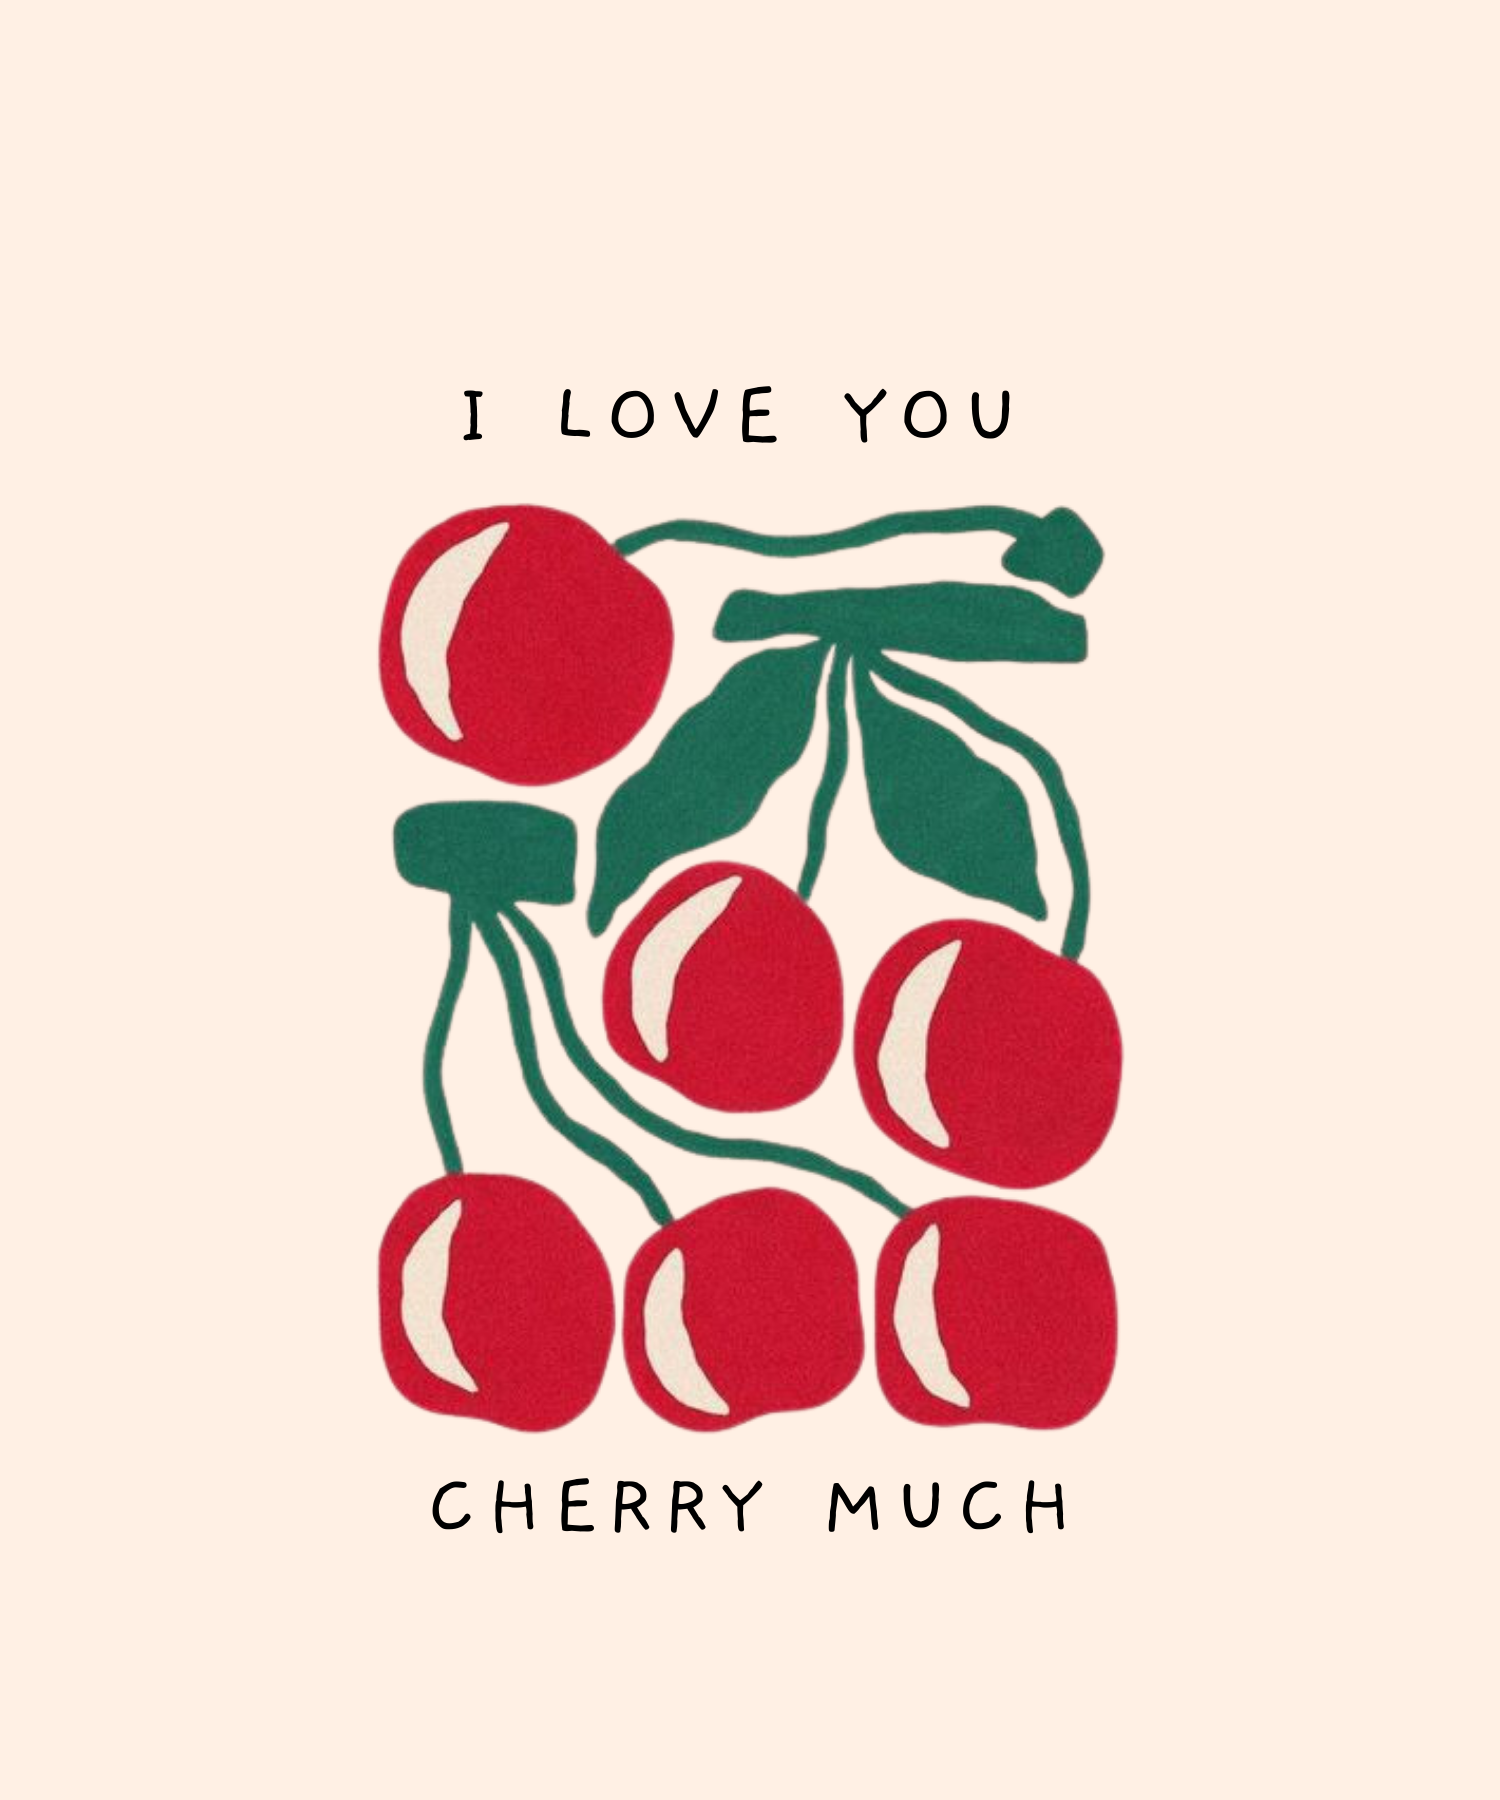 I Love You Cherry Much Greeting Card